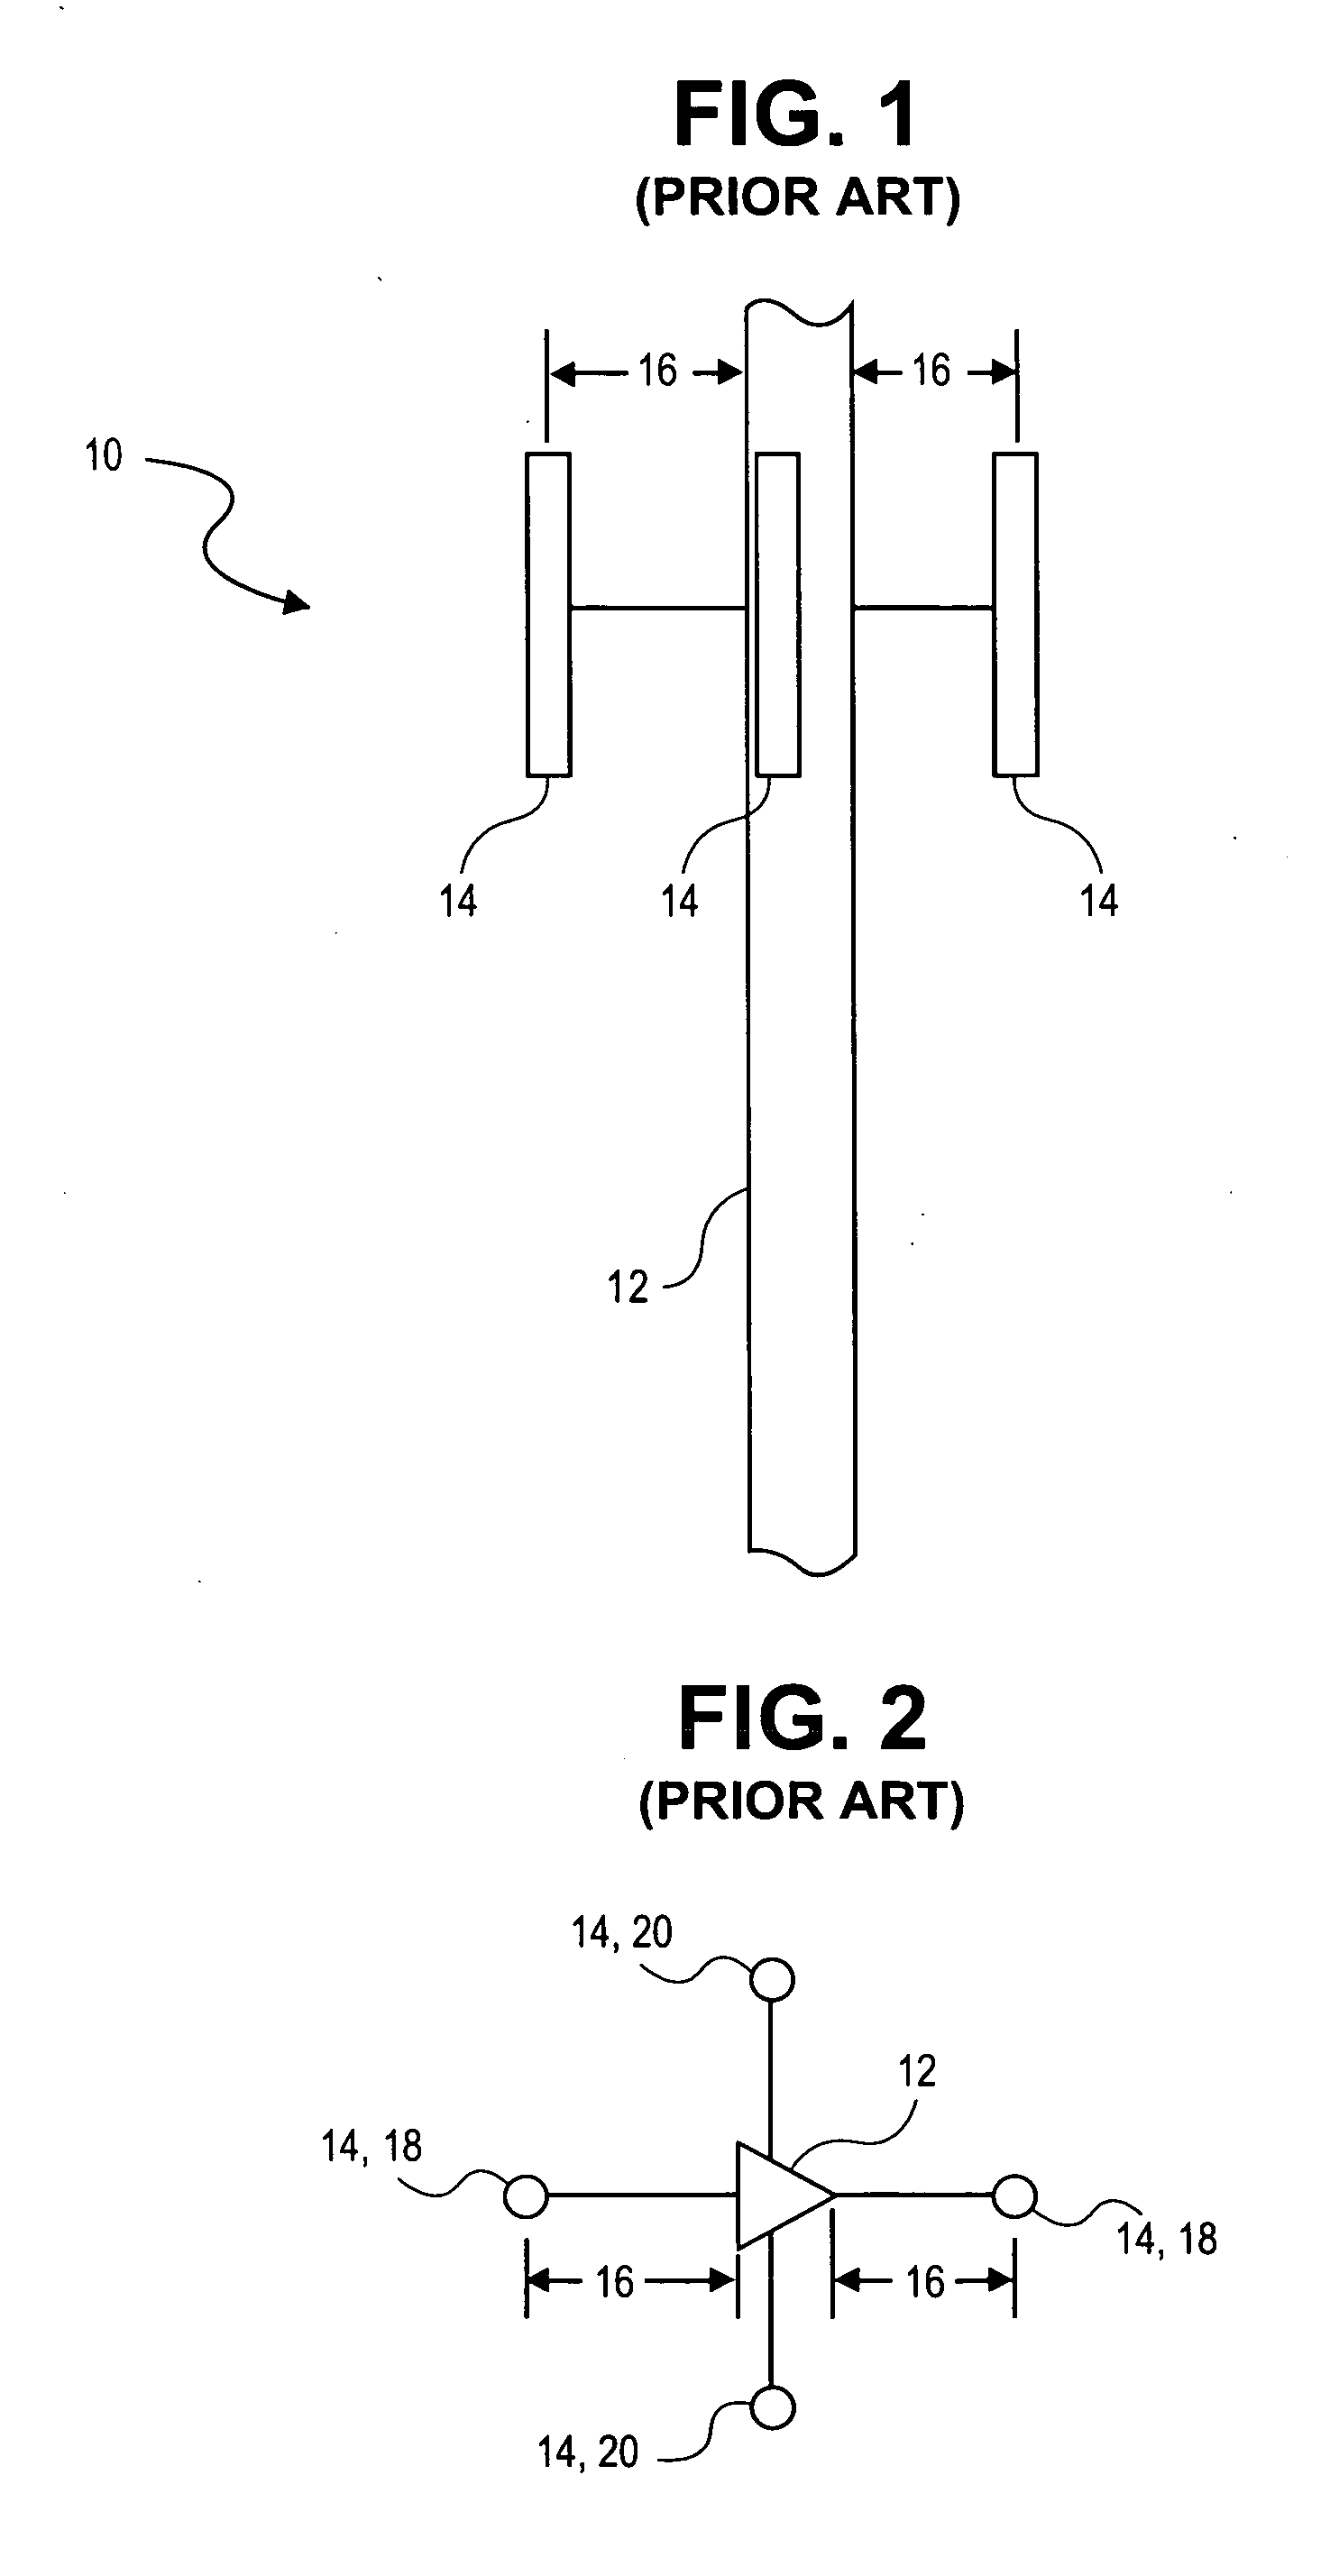 Apparatus and method for local broadcasting in the twenty-six megahertz short wave band